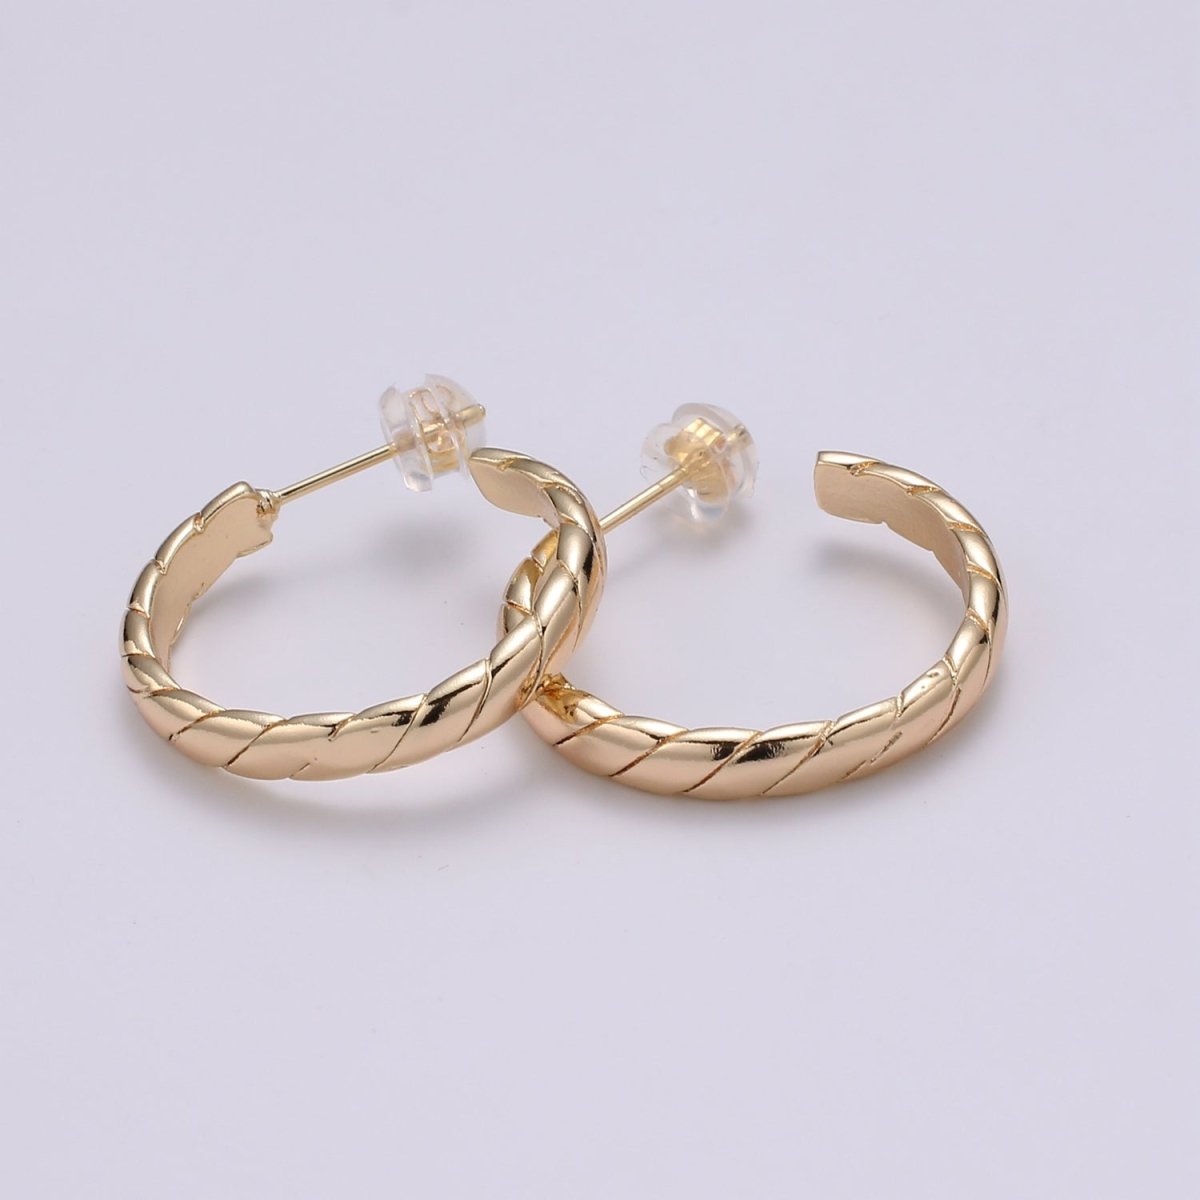 1pair Thin Scaled Circle Huggies Earrings, Plain Gold Filled Geometric Round Shape Casual/Formal Daily Wear Earring Jewelry Q-415 - DLUXCA